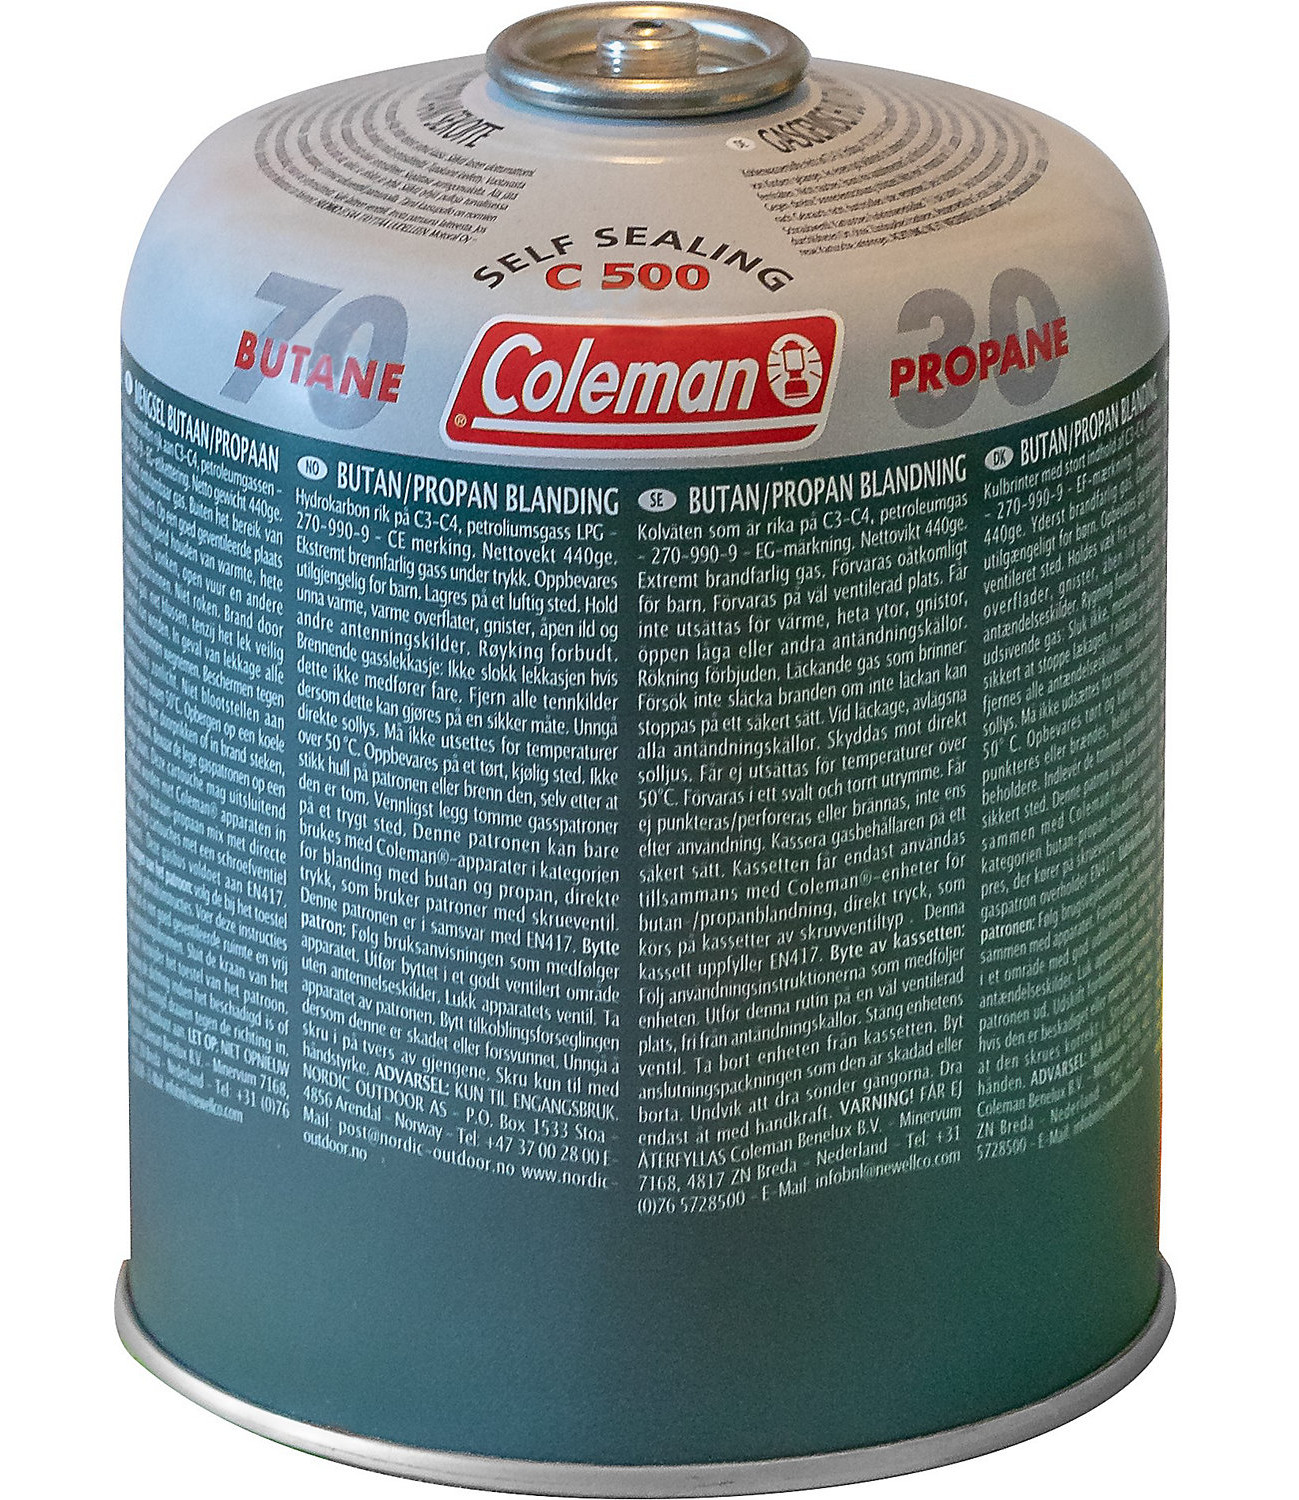 Coleman Cartridge C500 Value 6Pack Gas Canister